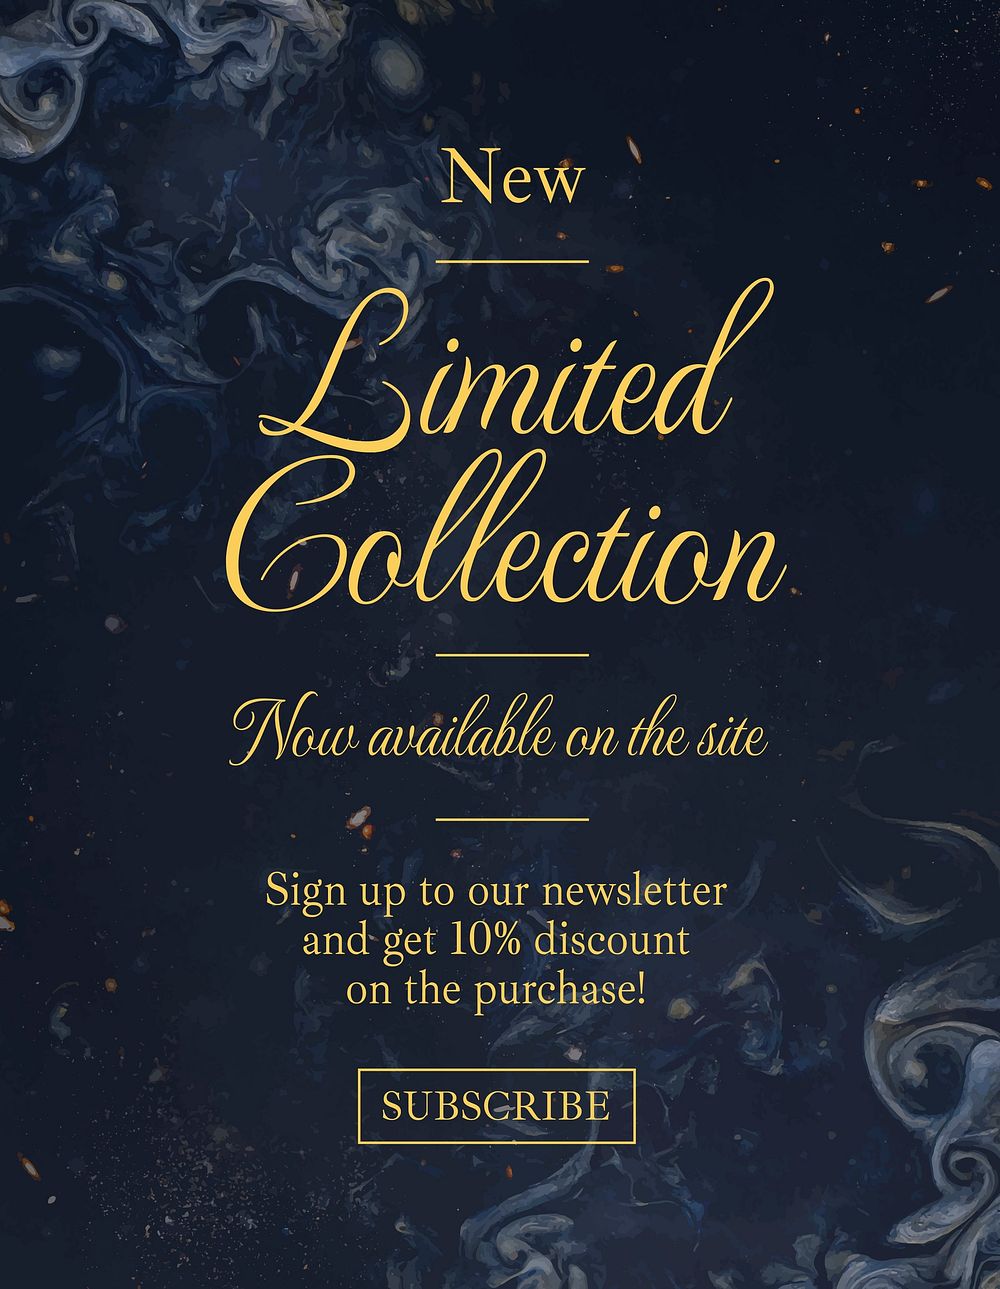 Limited collection flyer template, dark elegant, editable text psd